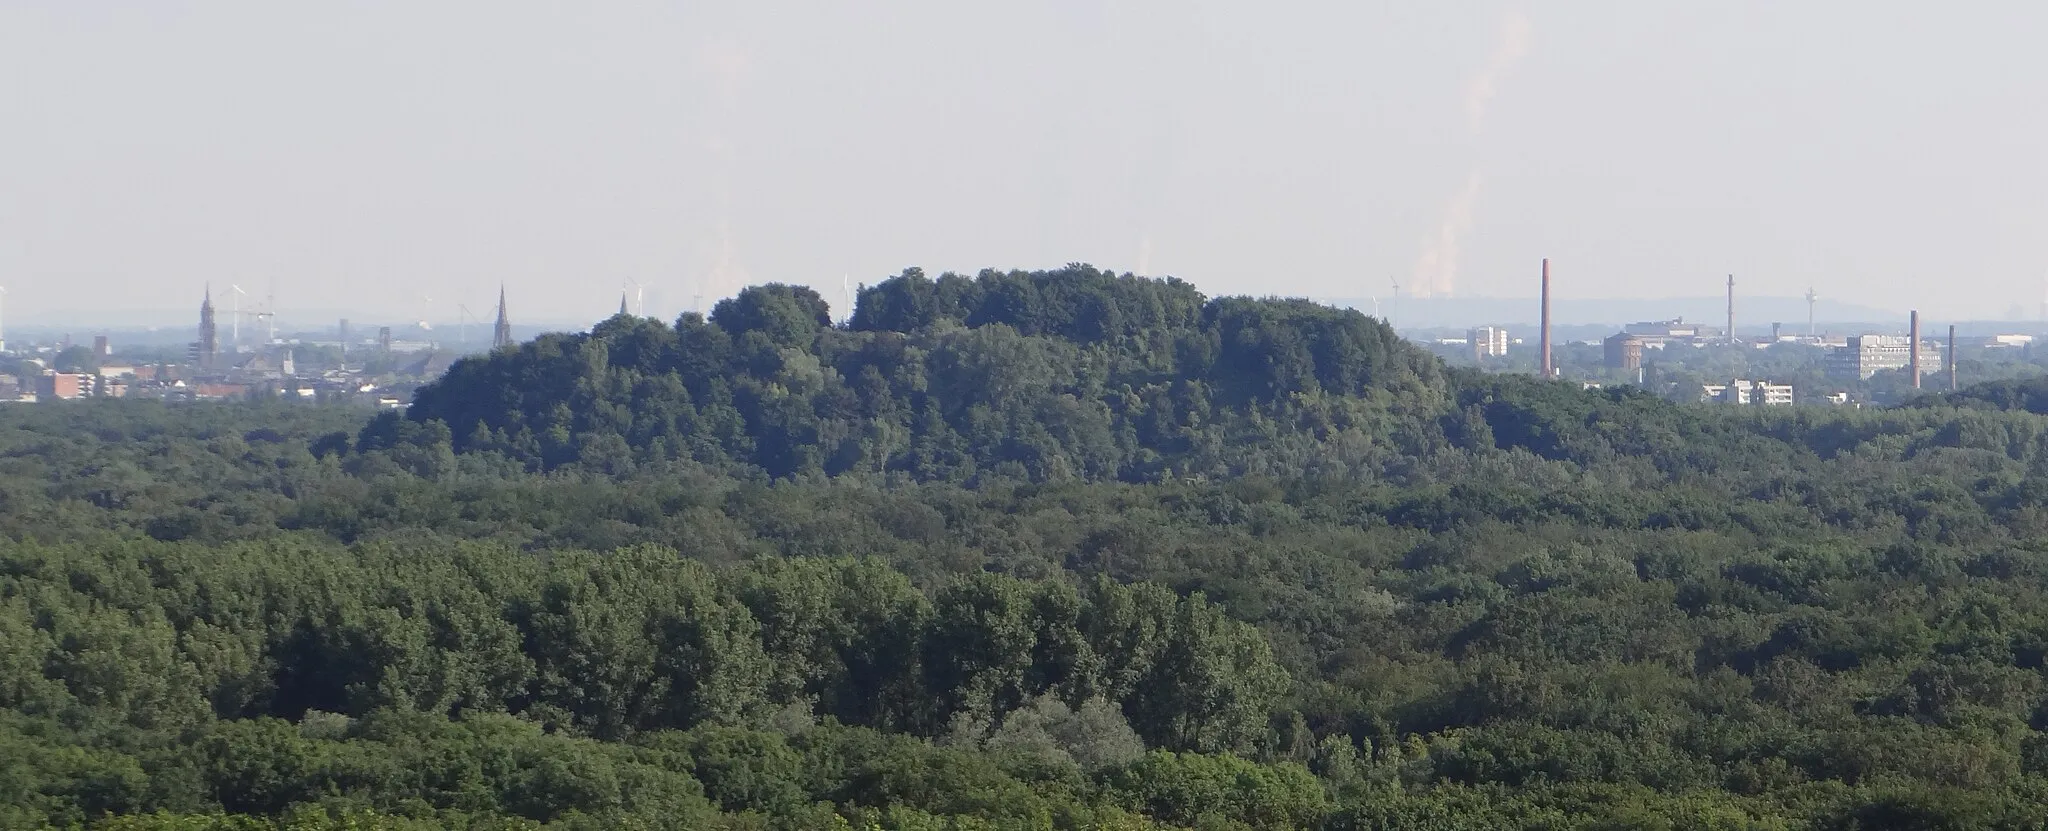 Photo showing: The Inrather Berg (Inrath Mountain) north of Krefeld, Germany (seen from the observation tower on Hülser Berg)